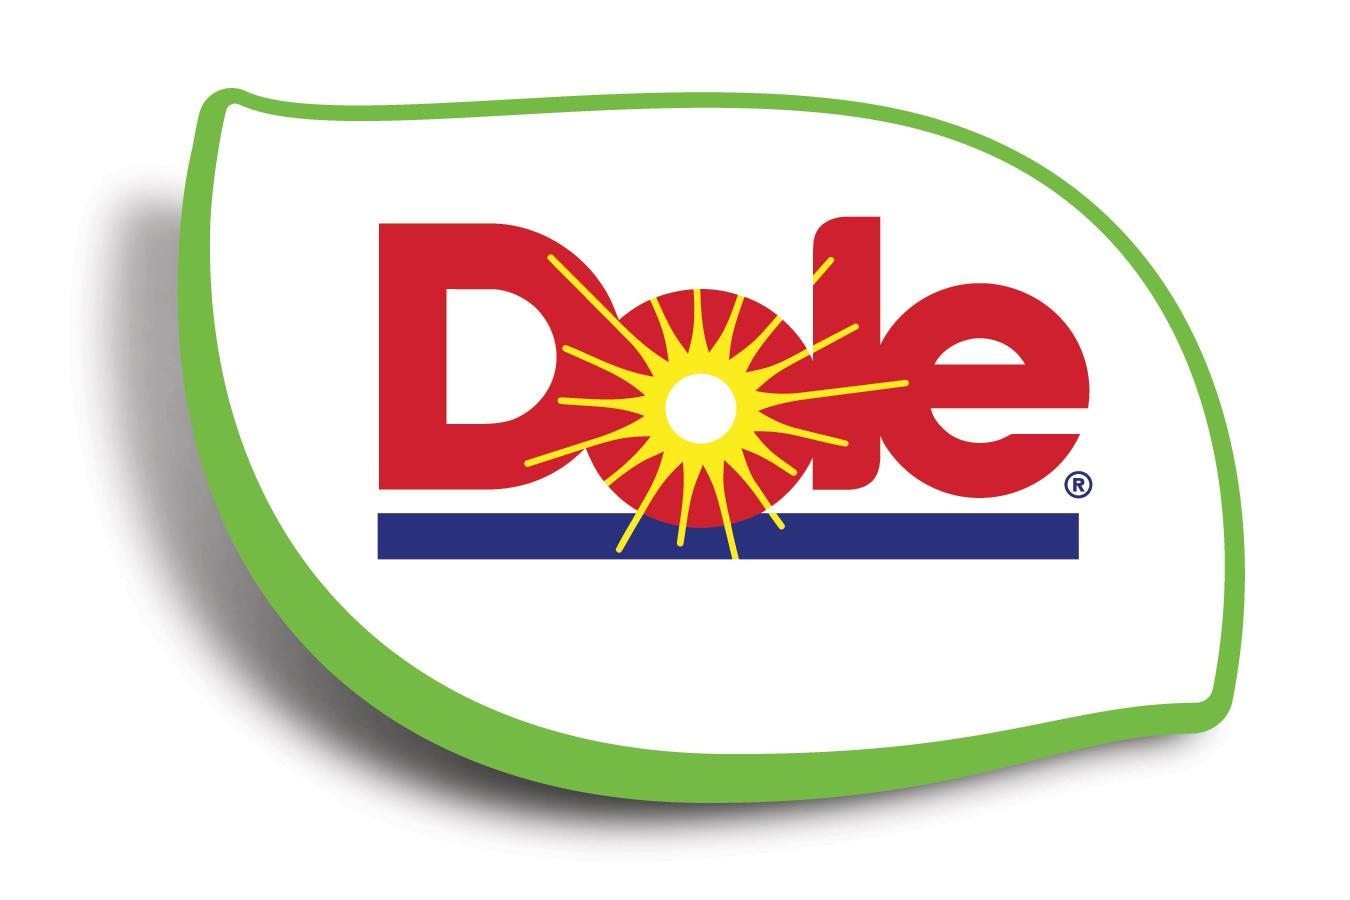 Dole Food Company Logo - Dole Launches Refreshed Brand